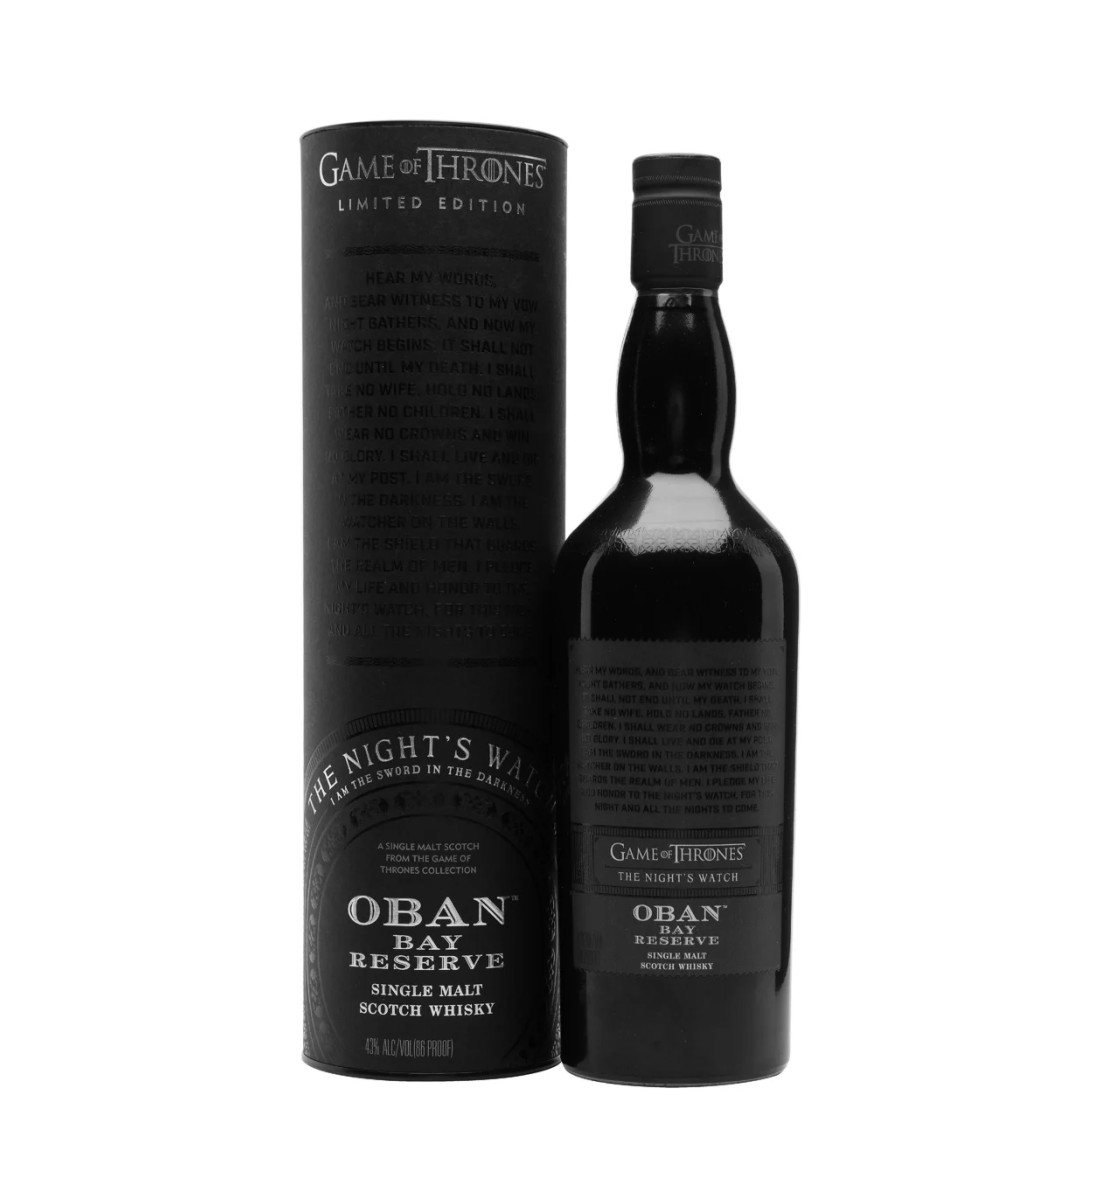 Oban Bay Reserve The Night's Watch 0.7L